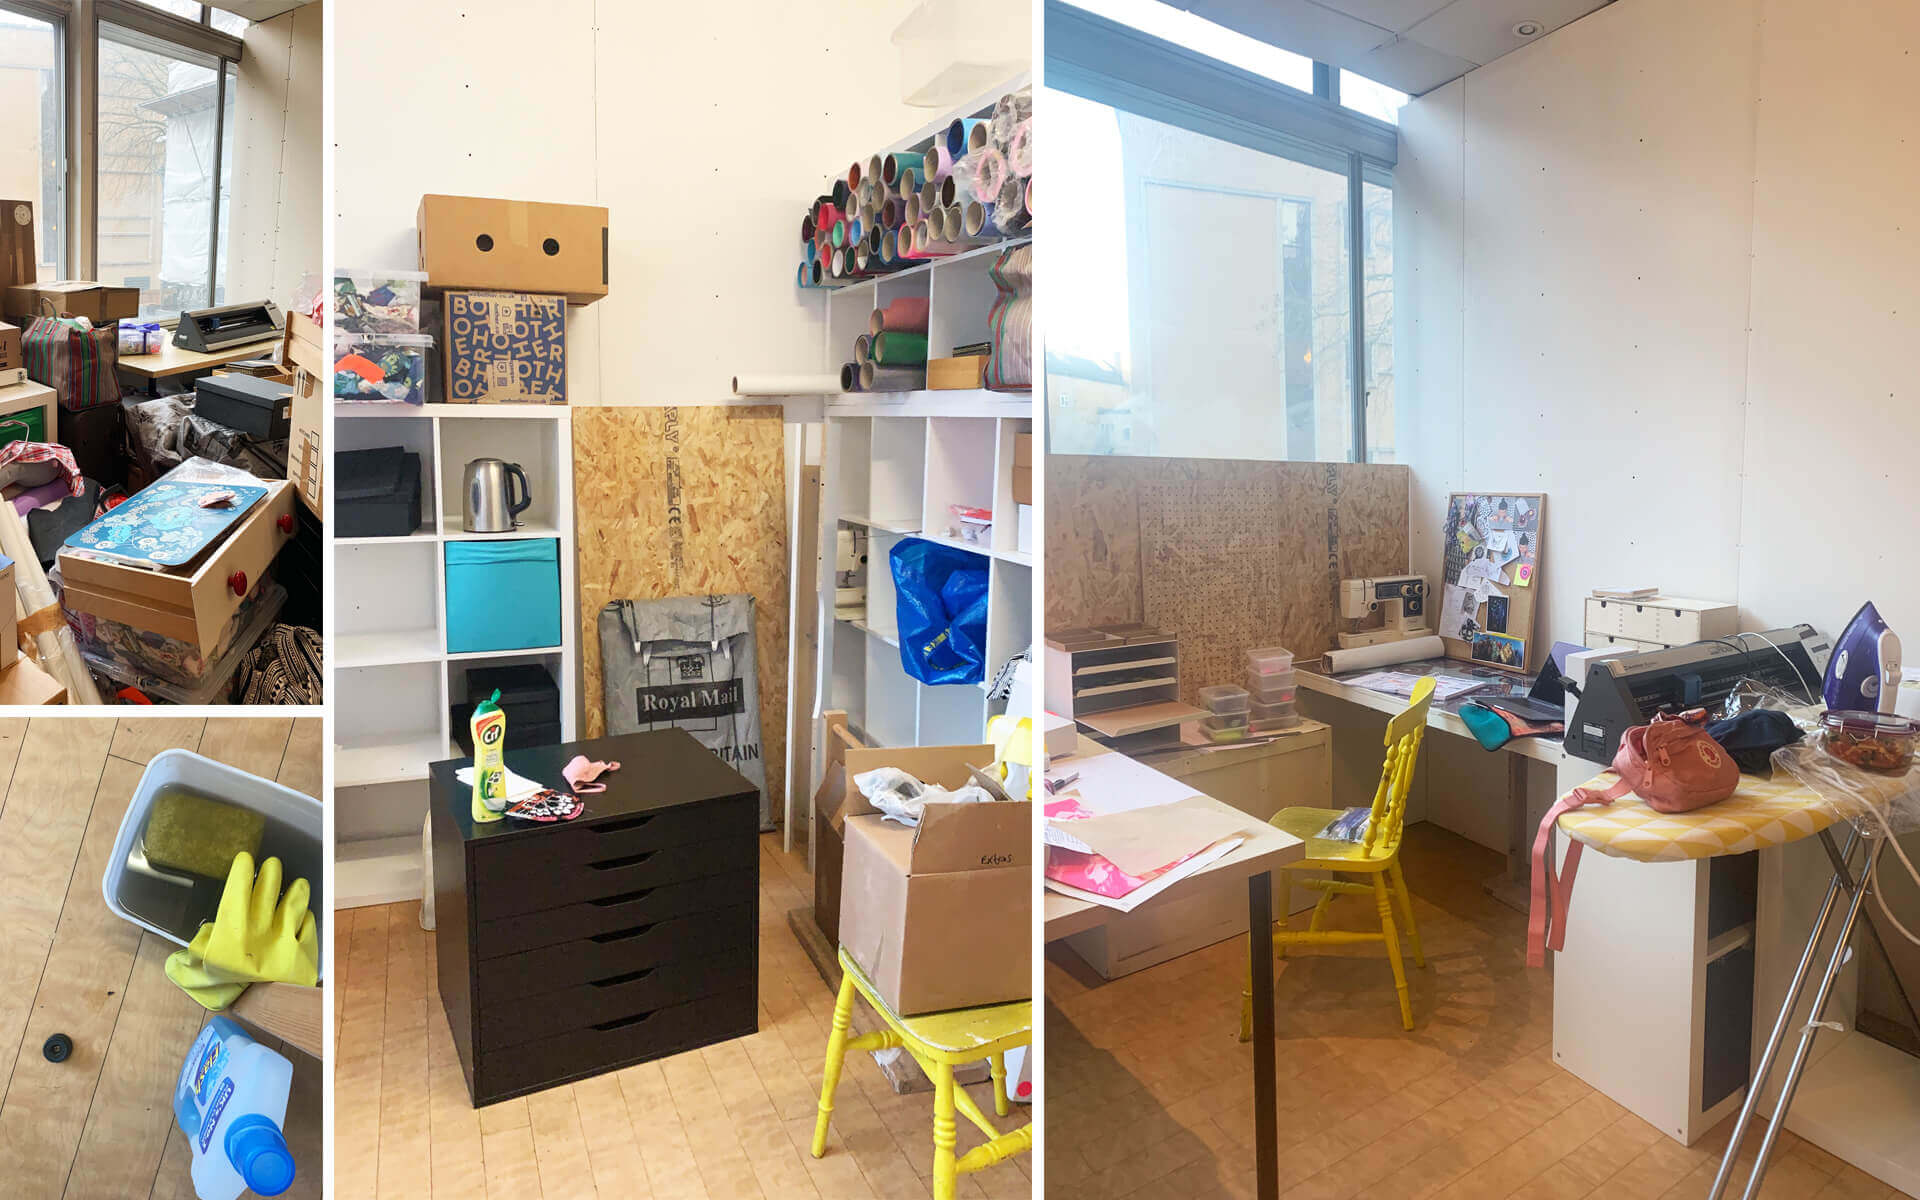 Four images showing a white walled new studio space from a variety of angles. Shelving, a desk, big windows, many boxes yet to be unpacked and a hand painted yellow chair